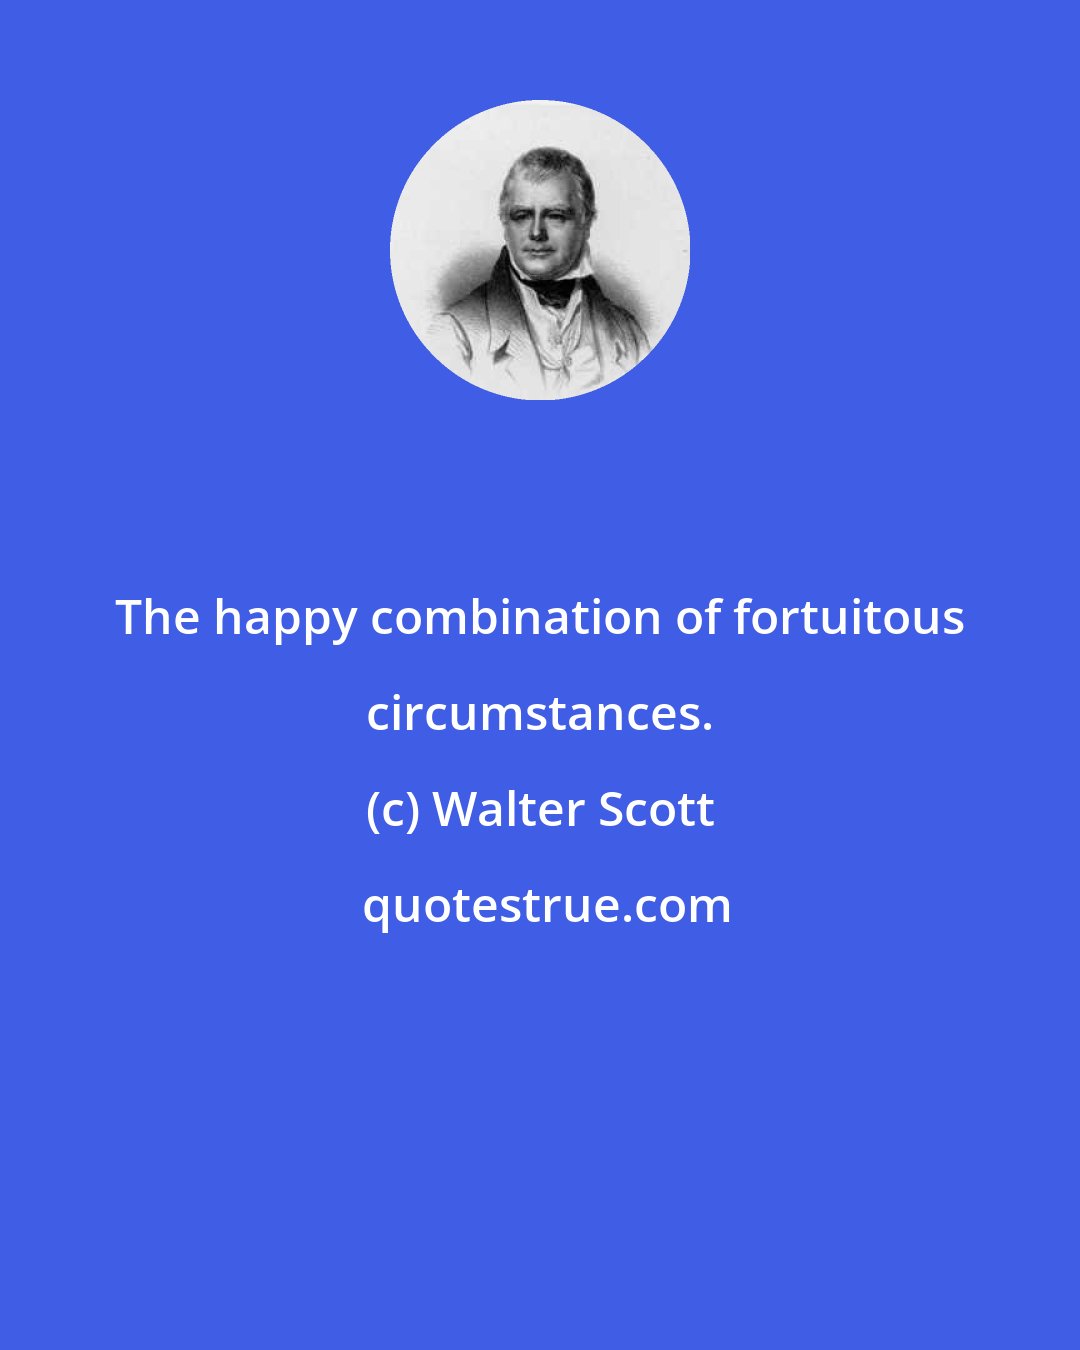 Walter Scott: The happy combination of fortuitous circumstances.